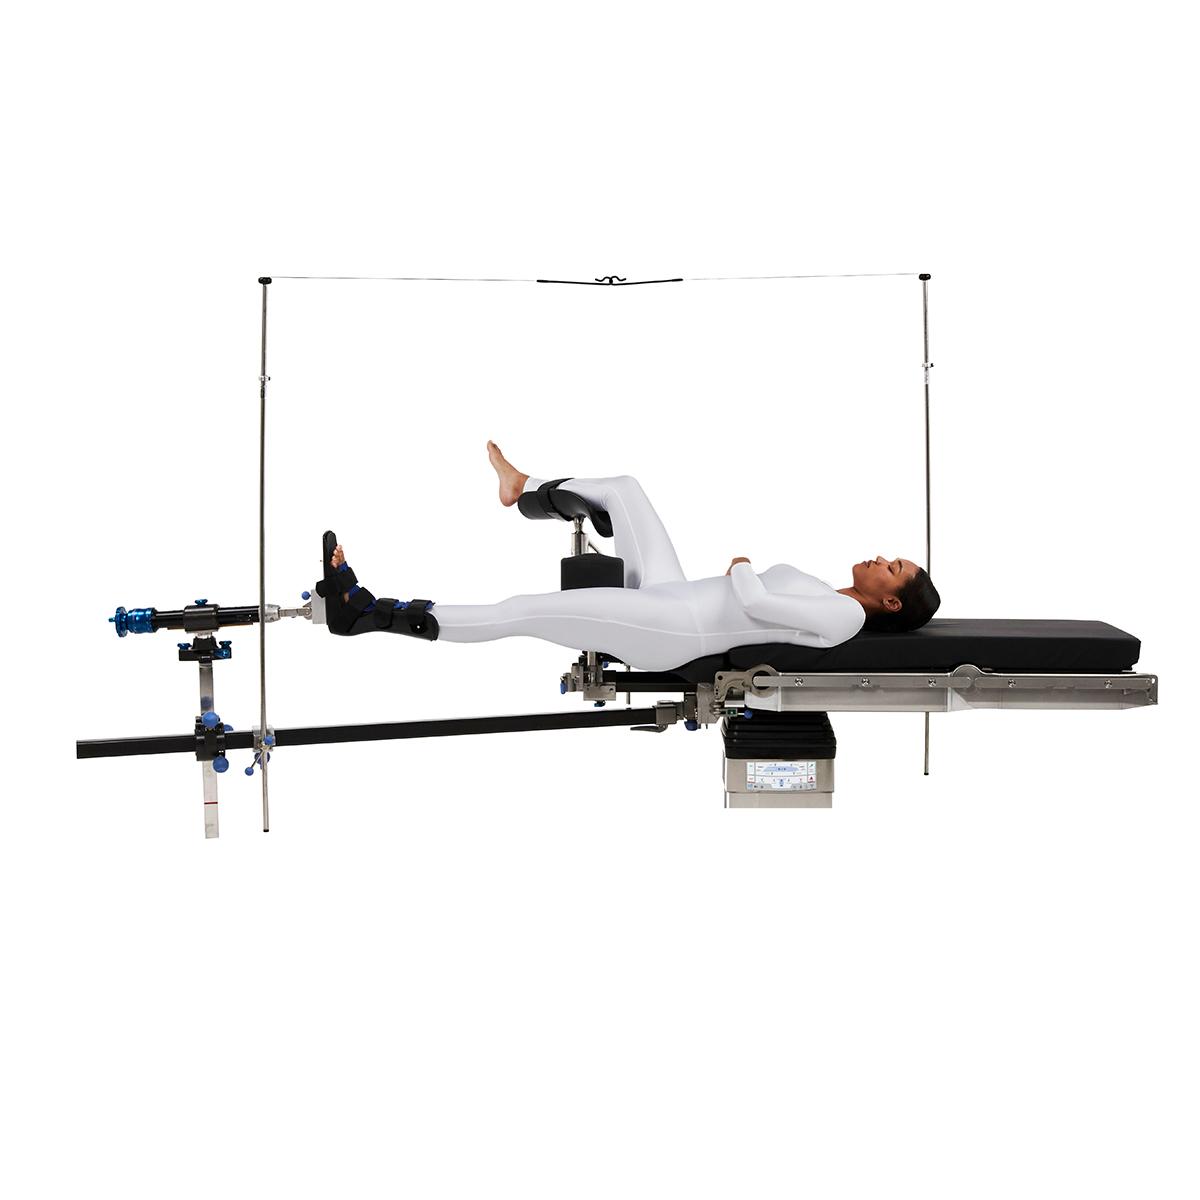 Patient positioned on a Hillrom surgical table using orthopedic extension accessories.